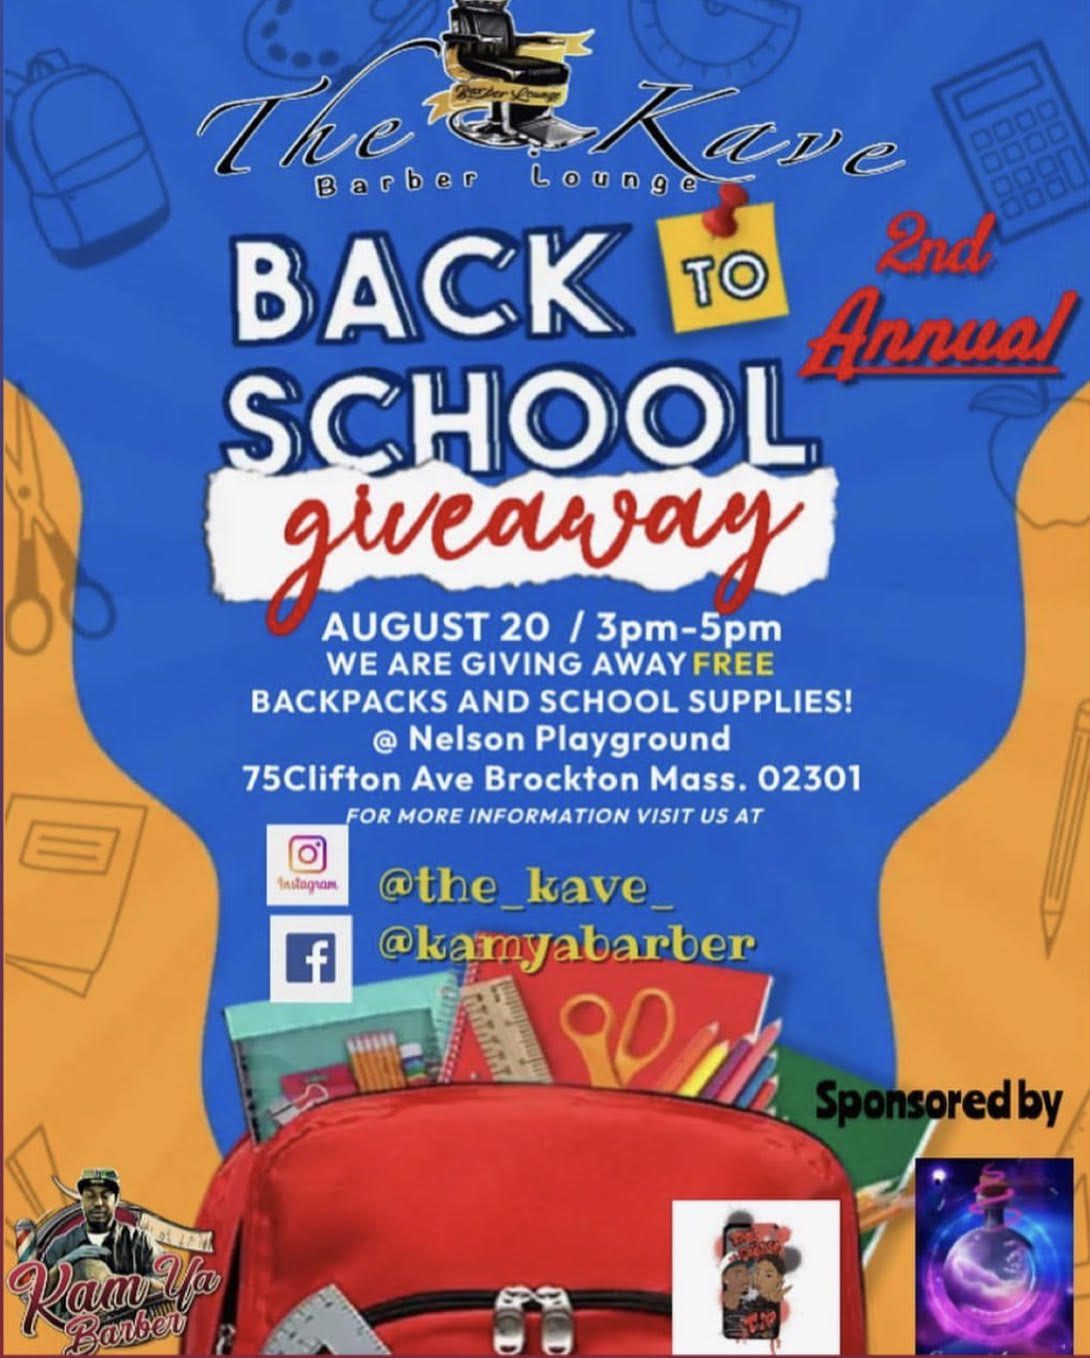 Back to School Giveaway, August 20, 2022